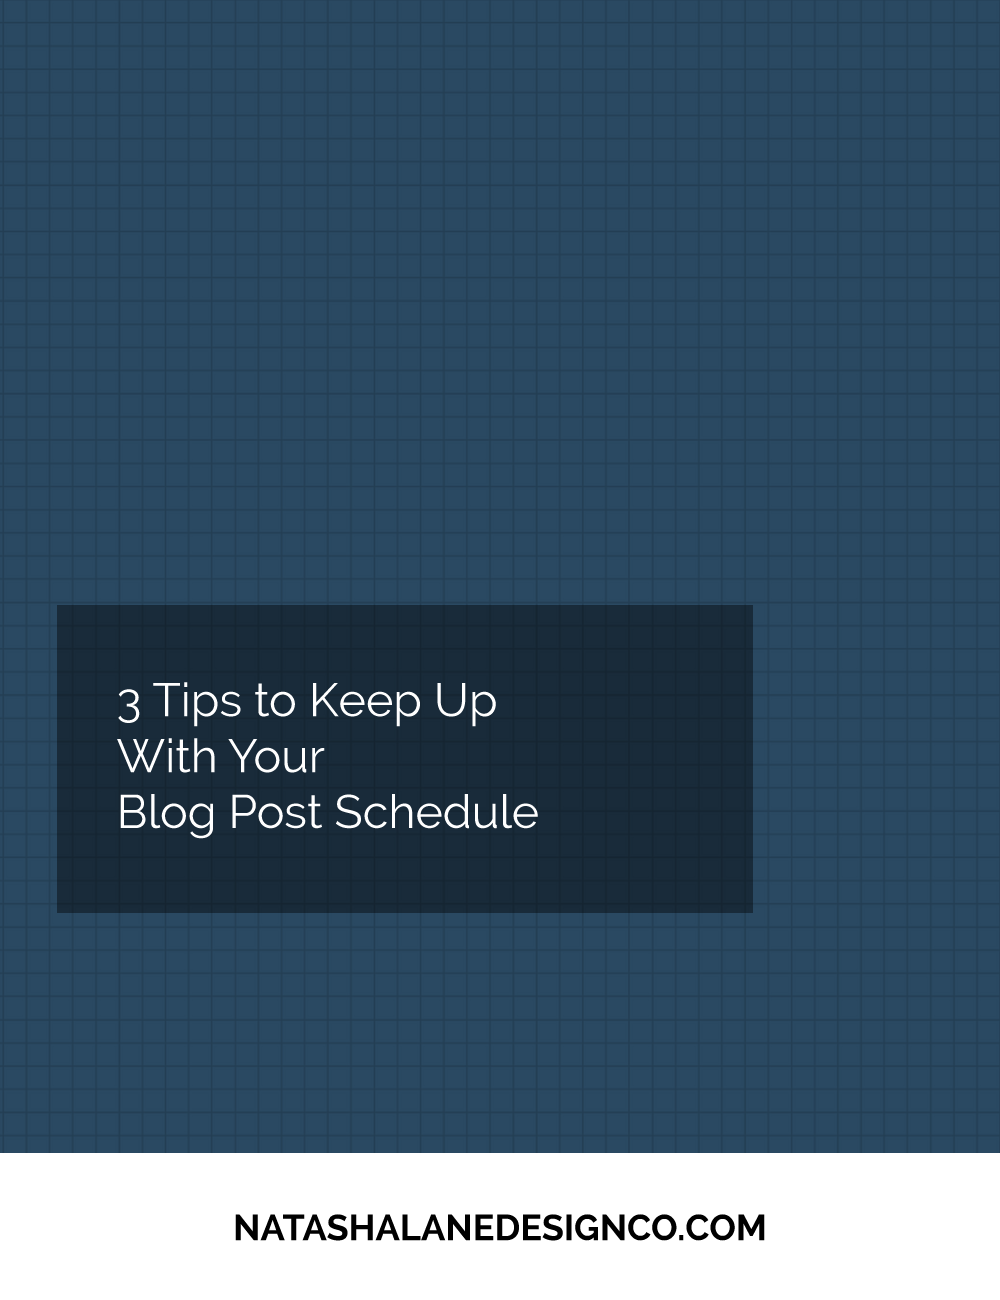 3 Tips to Keep up with your Blog Post Schedule